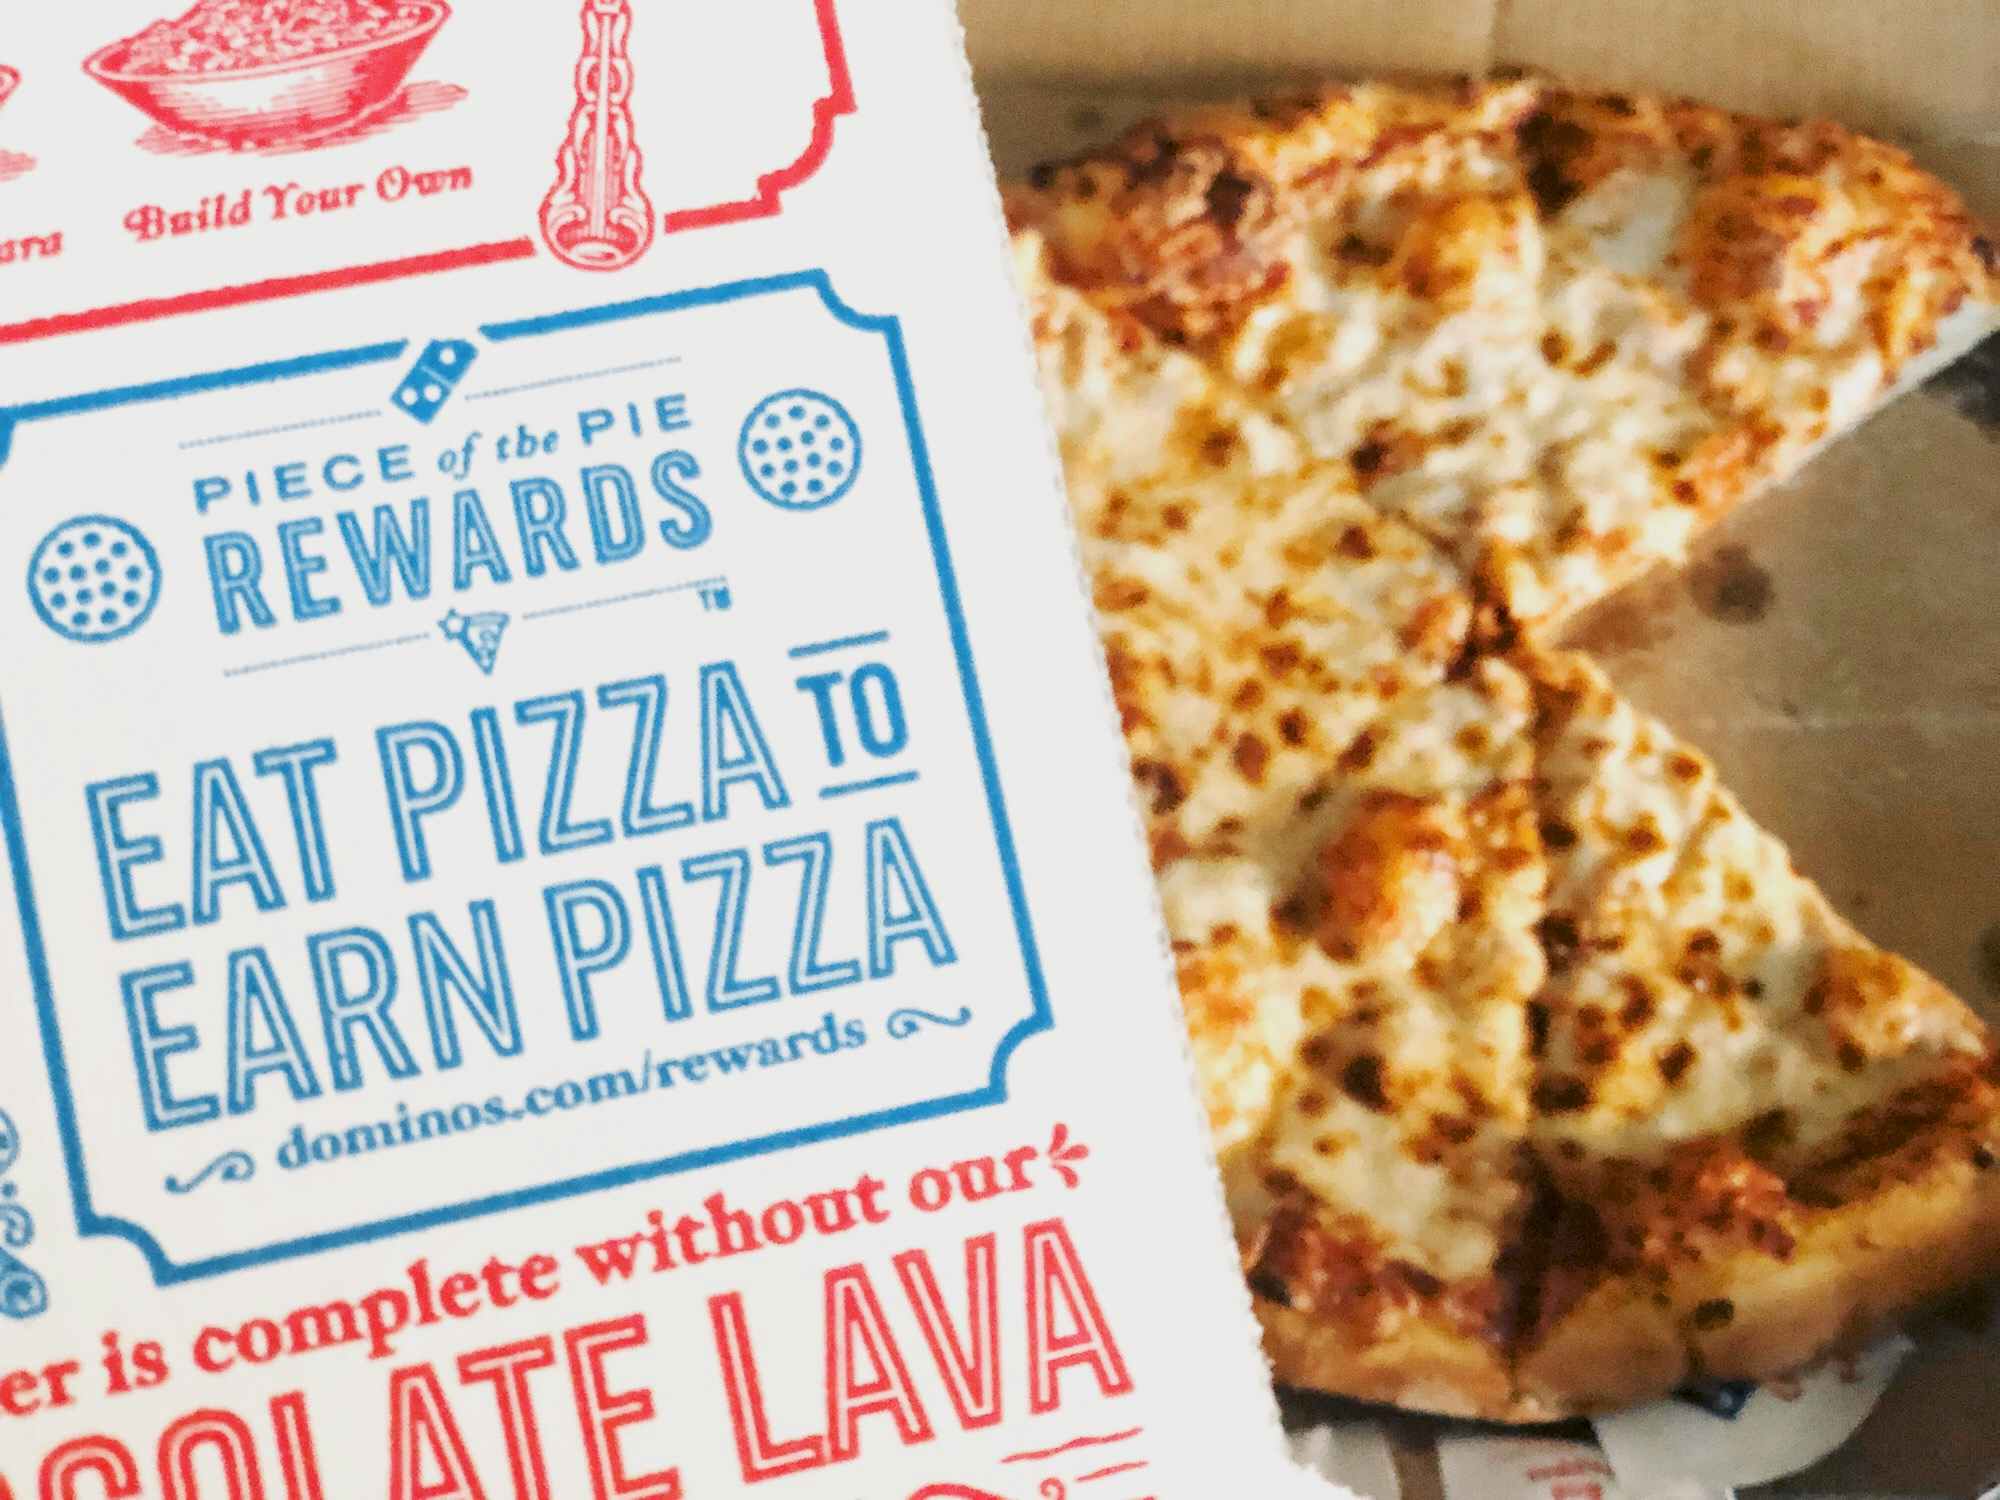 A Domino's pizza box advertising their Piece of the Pie Rewards program being held over a pizza with some slices taken from it.